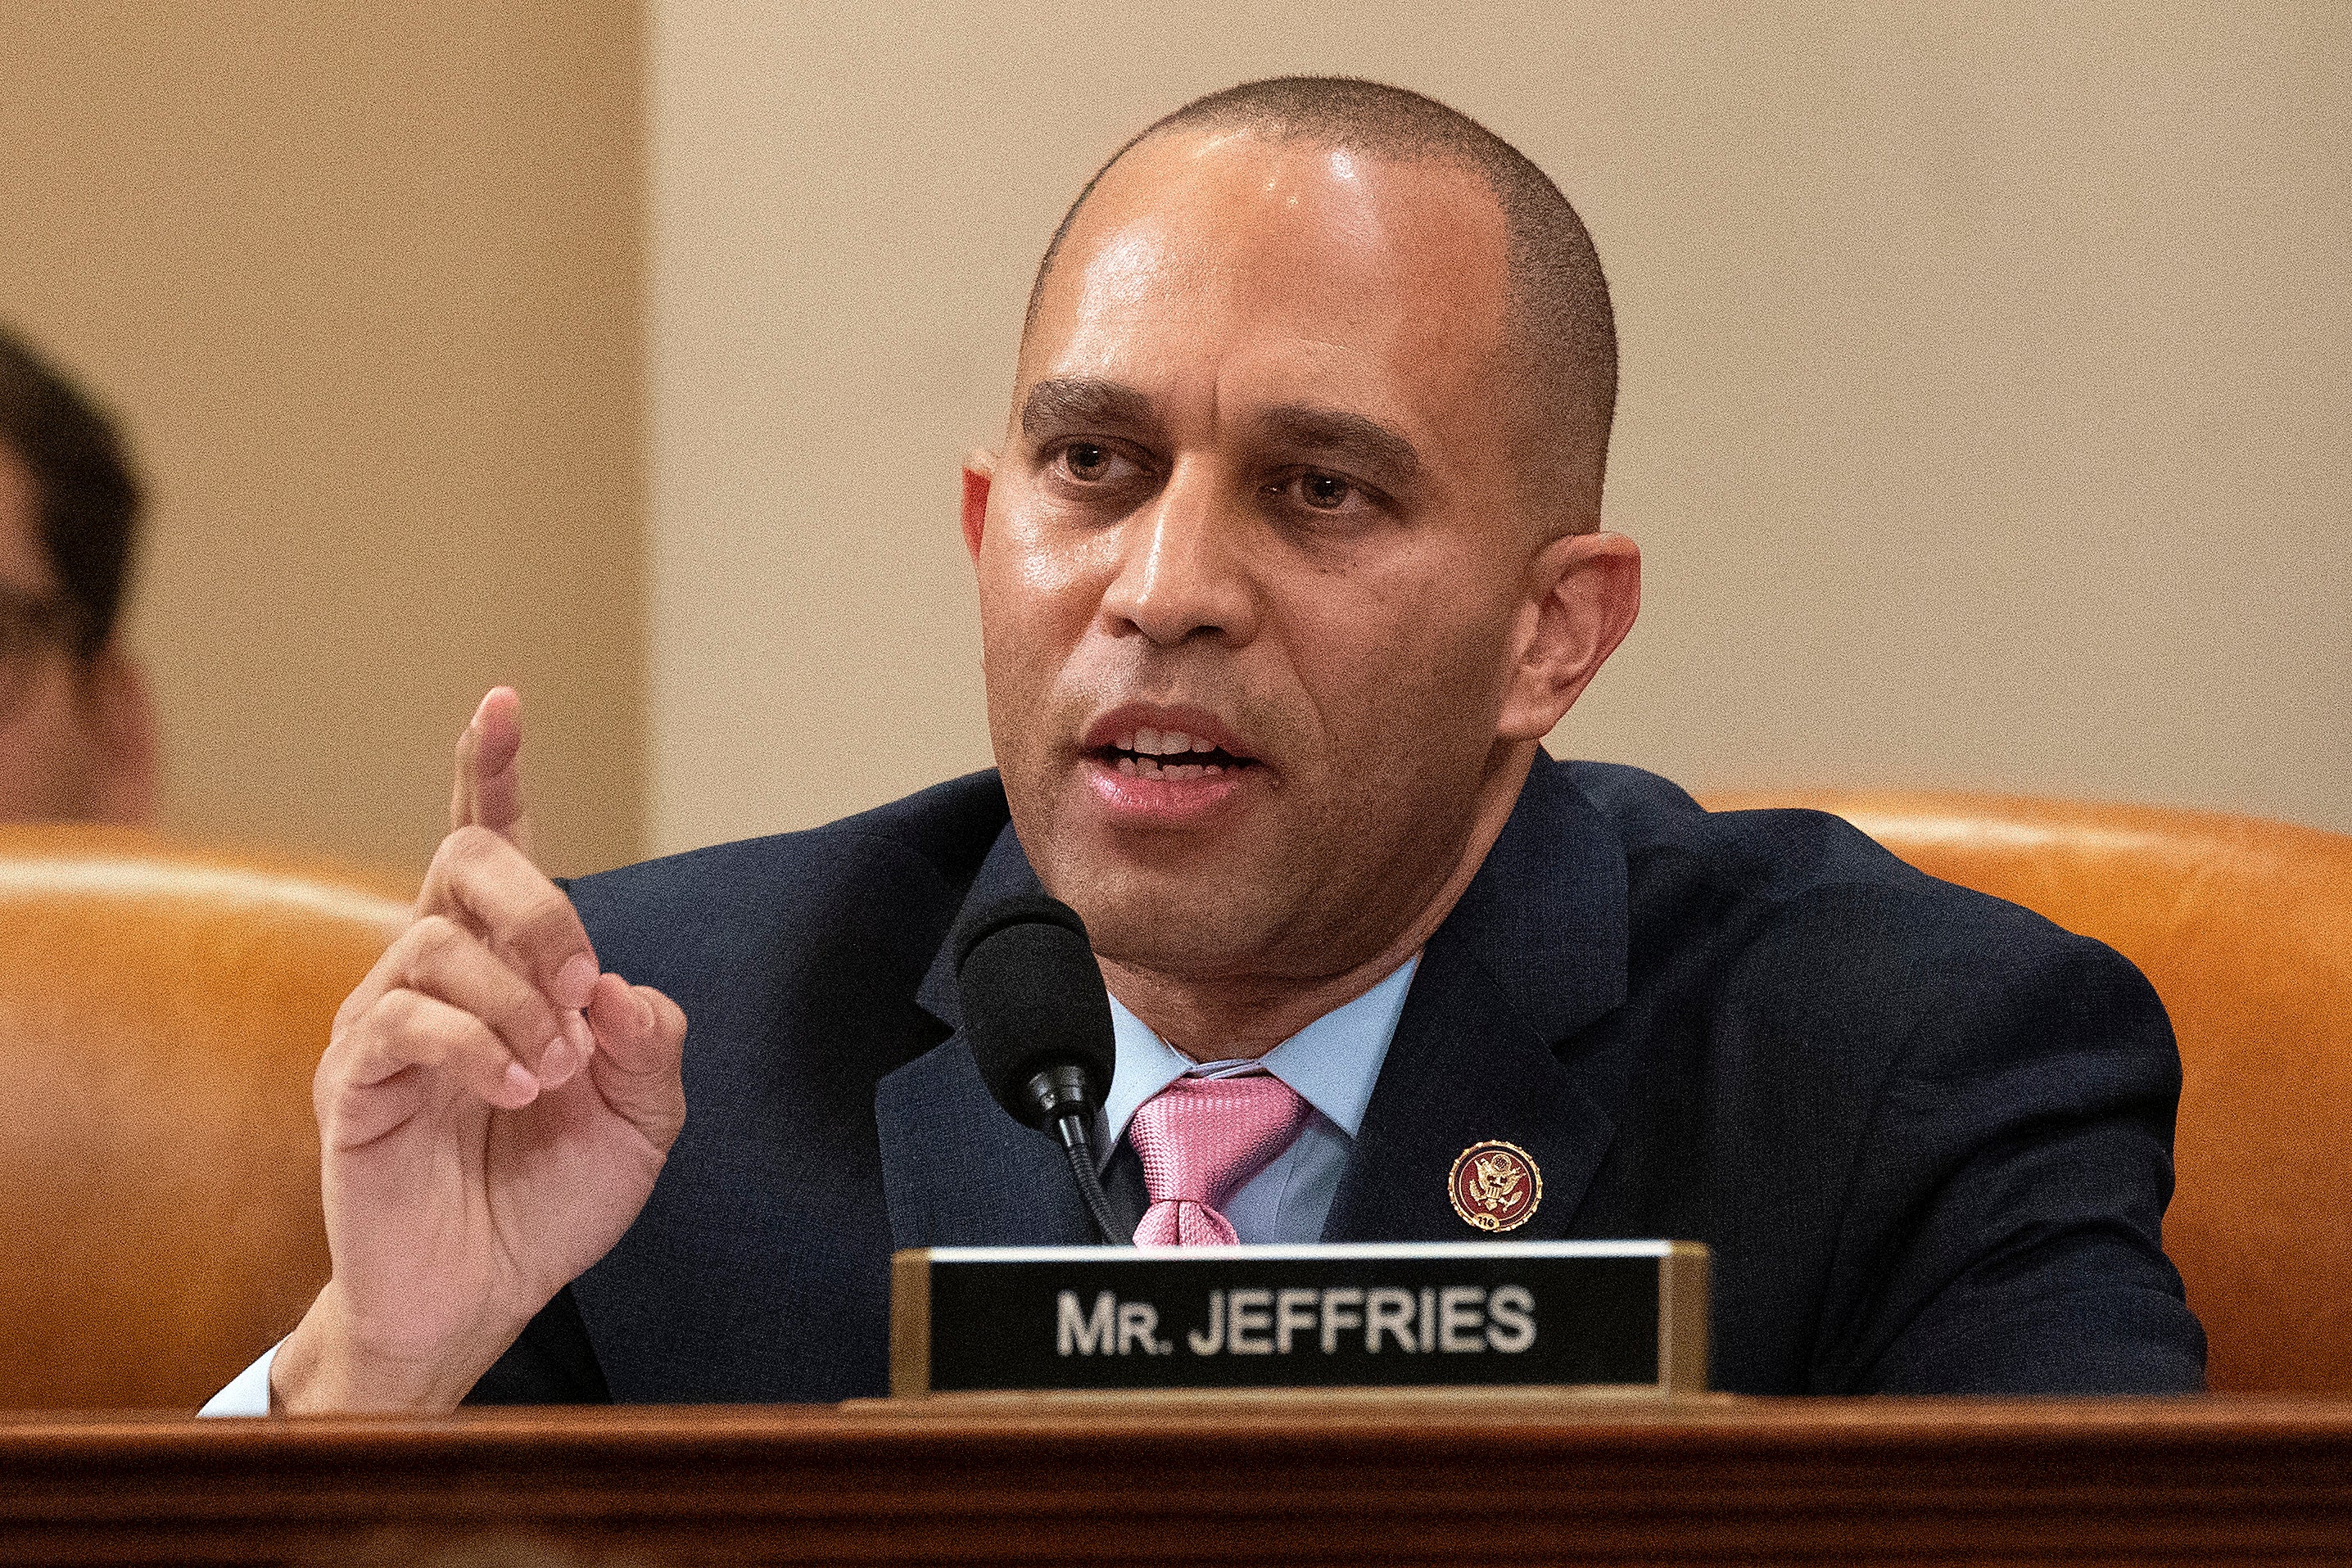 US House Judiciary Committee member Rep. Hakeem Jeffries delivers an opening statement during a committee markup hearing with Rep. Jamie Raskiin (D-MD) on the articles of impeachment against President Donald Trump in the Longworth House Office Building on Capitol Hill on 11 December, 2019 in Washington, DC.